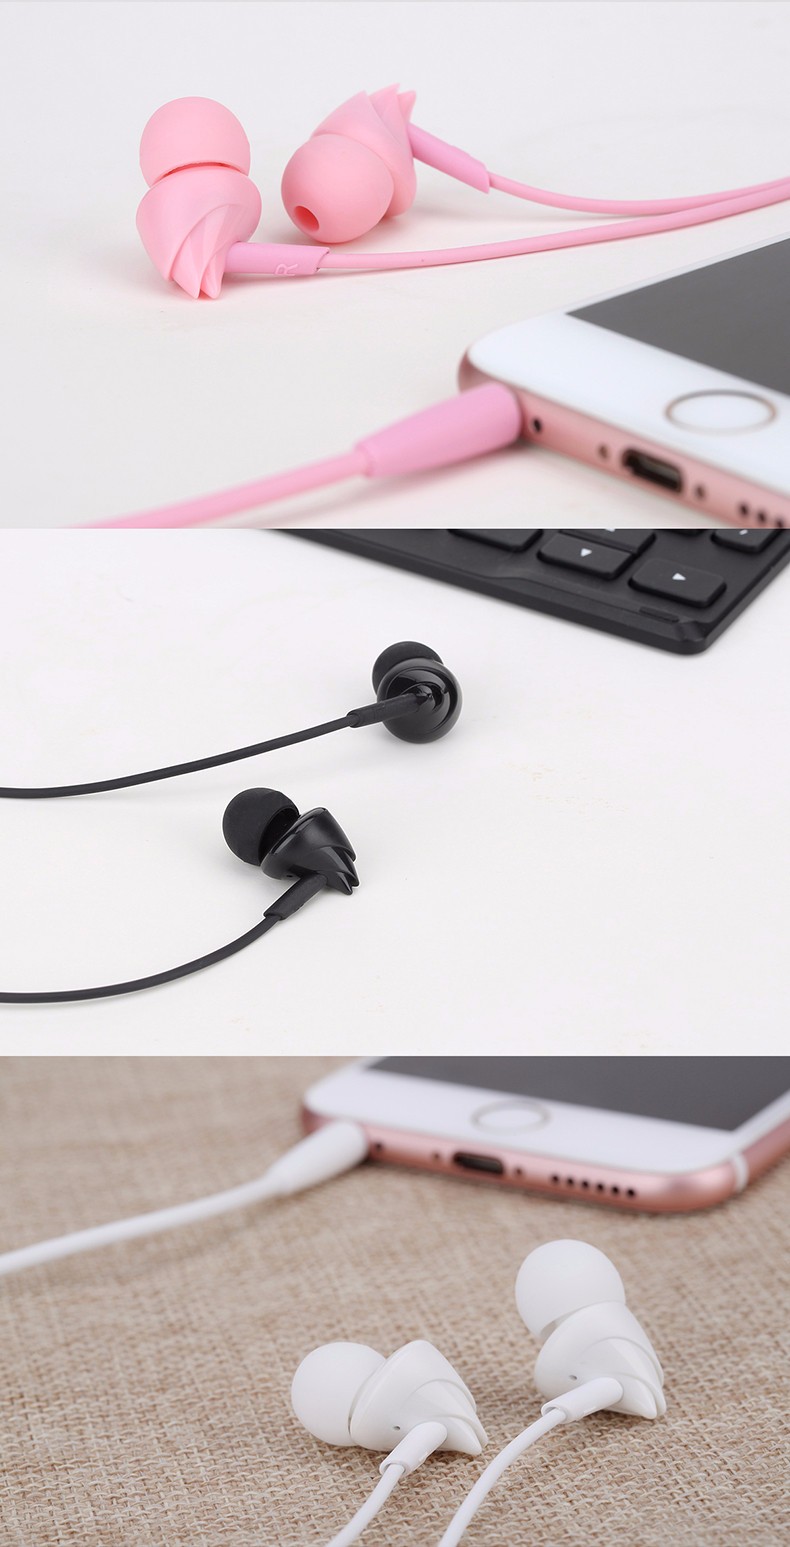 ROCK Y1 3.5mm 1.2M Stereo HiFi Earphone with Mic for Xiaomi Samsung iPhone